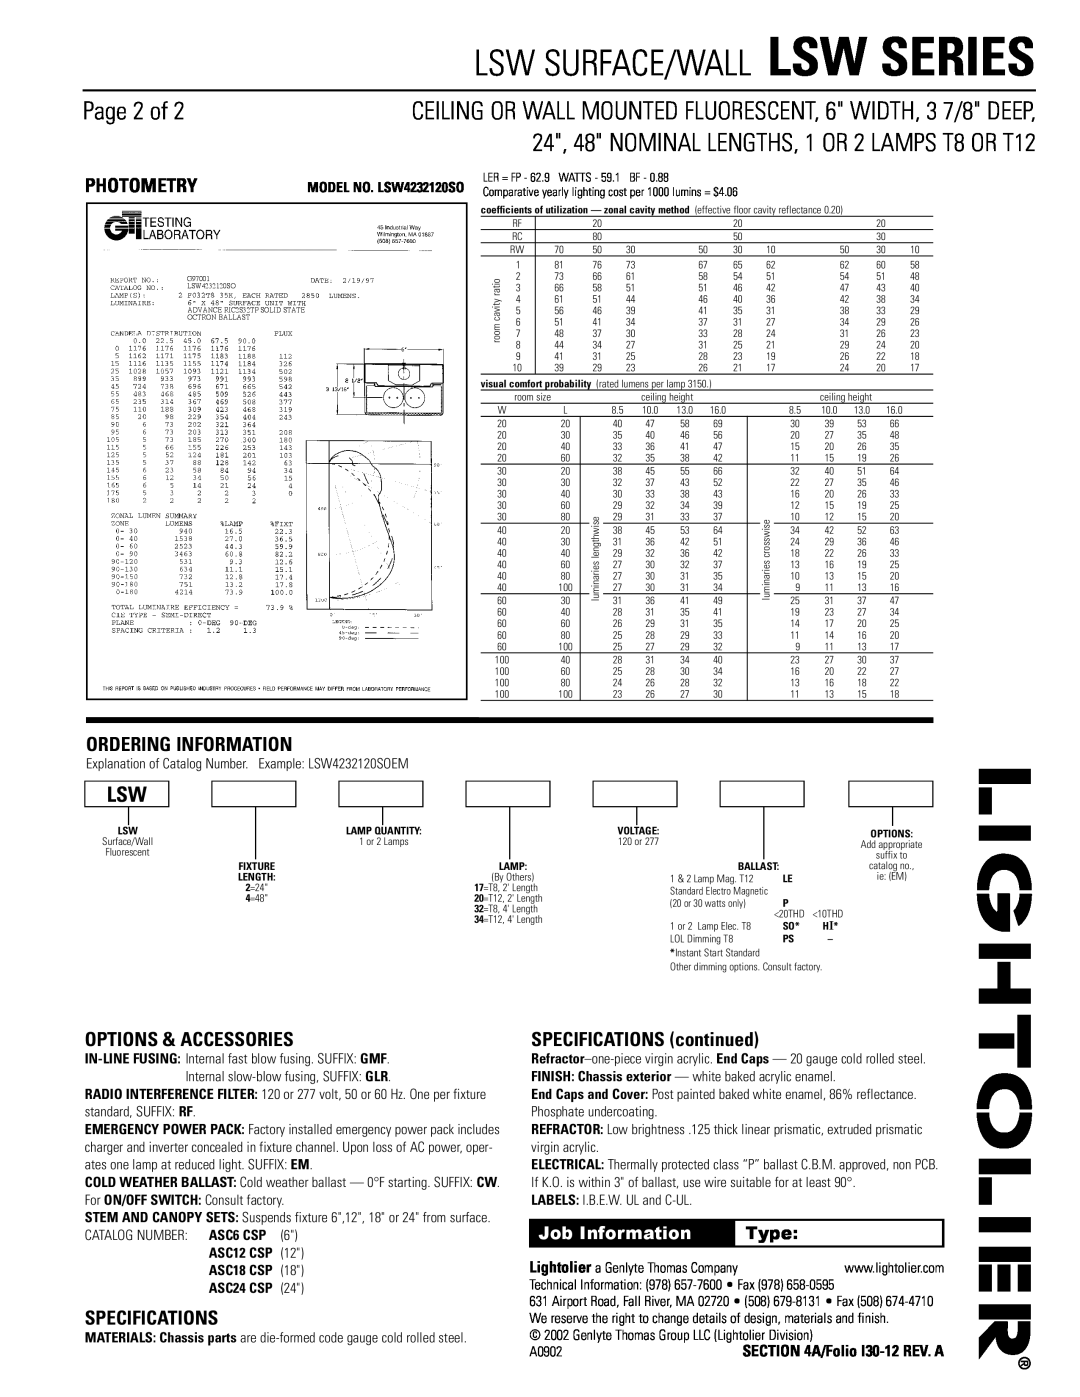 Lightolier LSW4232120SO Page 2 of, Photometry, Ordering Information, Options & Accessories, Specifications, 7/8 DEEP, Type 